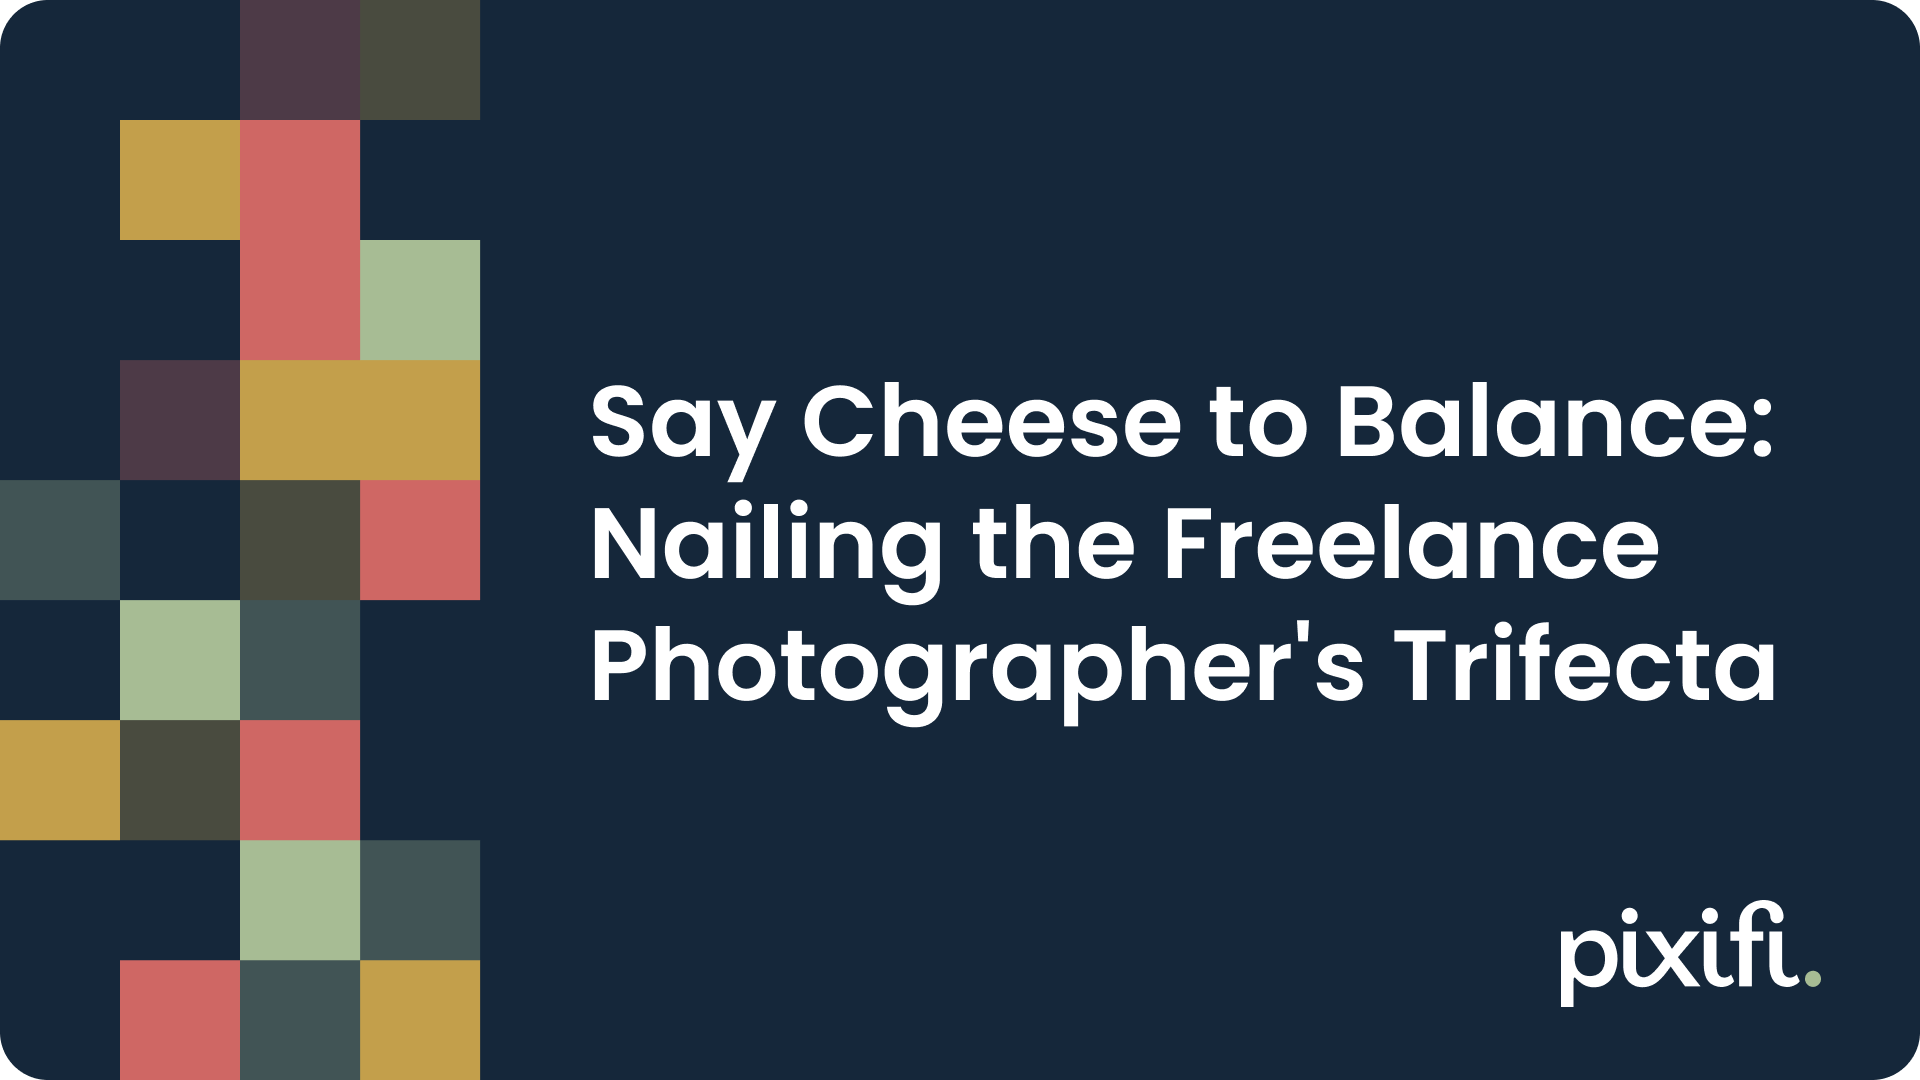 Say Cheese to Balance: Nailing the Freelance Photographer's Trifecta